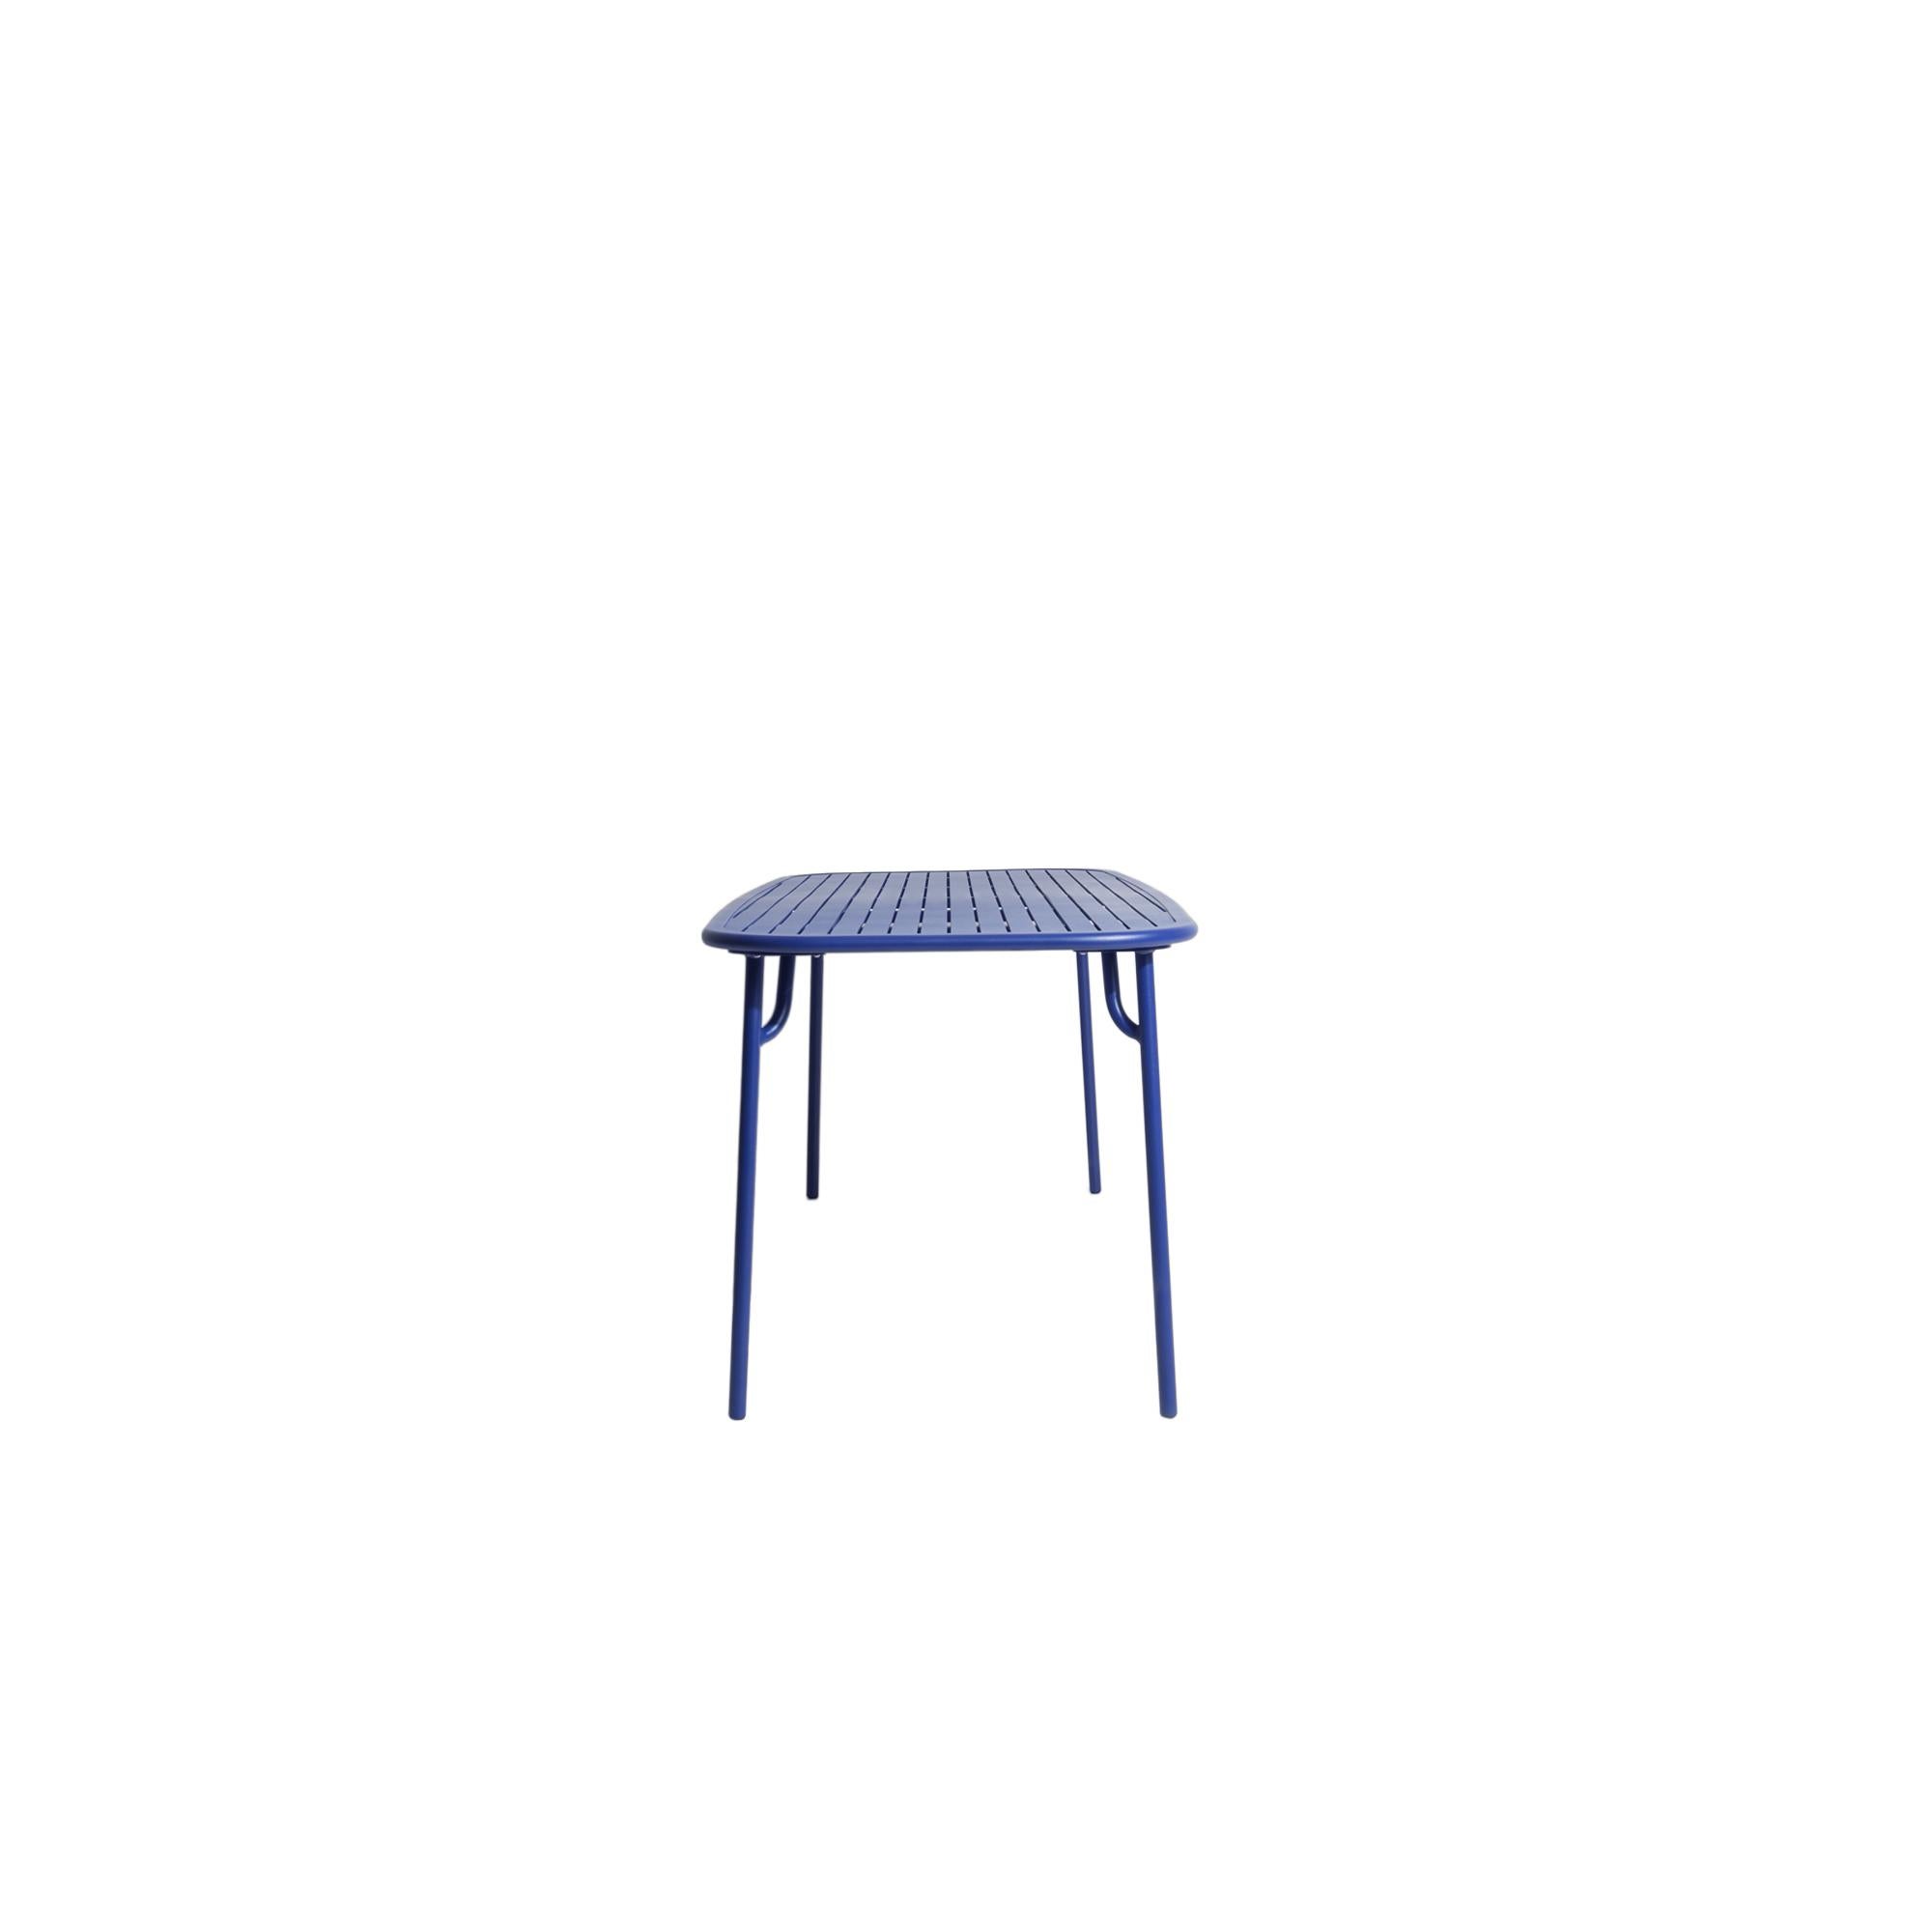 Chinese Petite Friture Week-End Medium Rectangular Dining Table in Blue with Slats For Sale